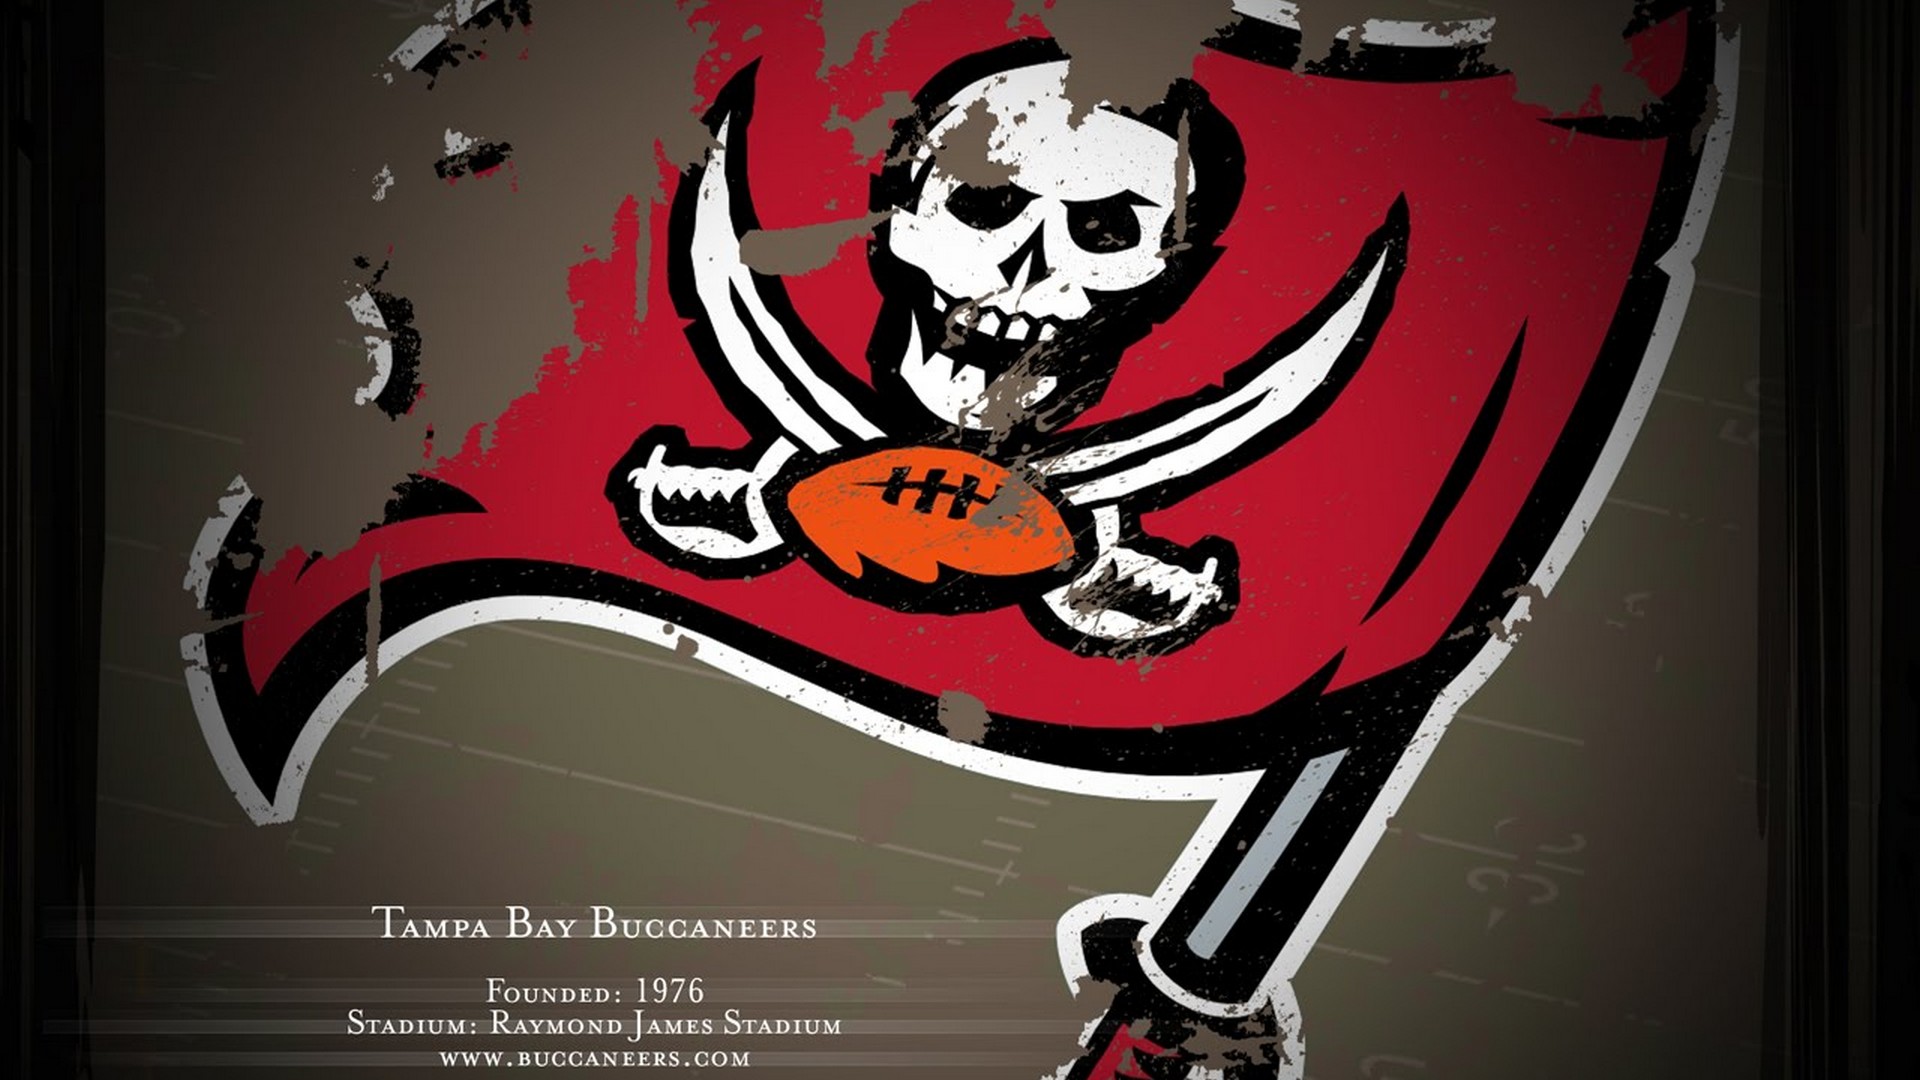 Tampa Bay Buccaneers Wallpaper for Computer With high-resolution 1920X1080 pixel. Download and set as wallpaper for Desktop Computer, Apple iPhone X, XS Max, XR, 8, 7, 6, SE, iPad, Android